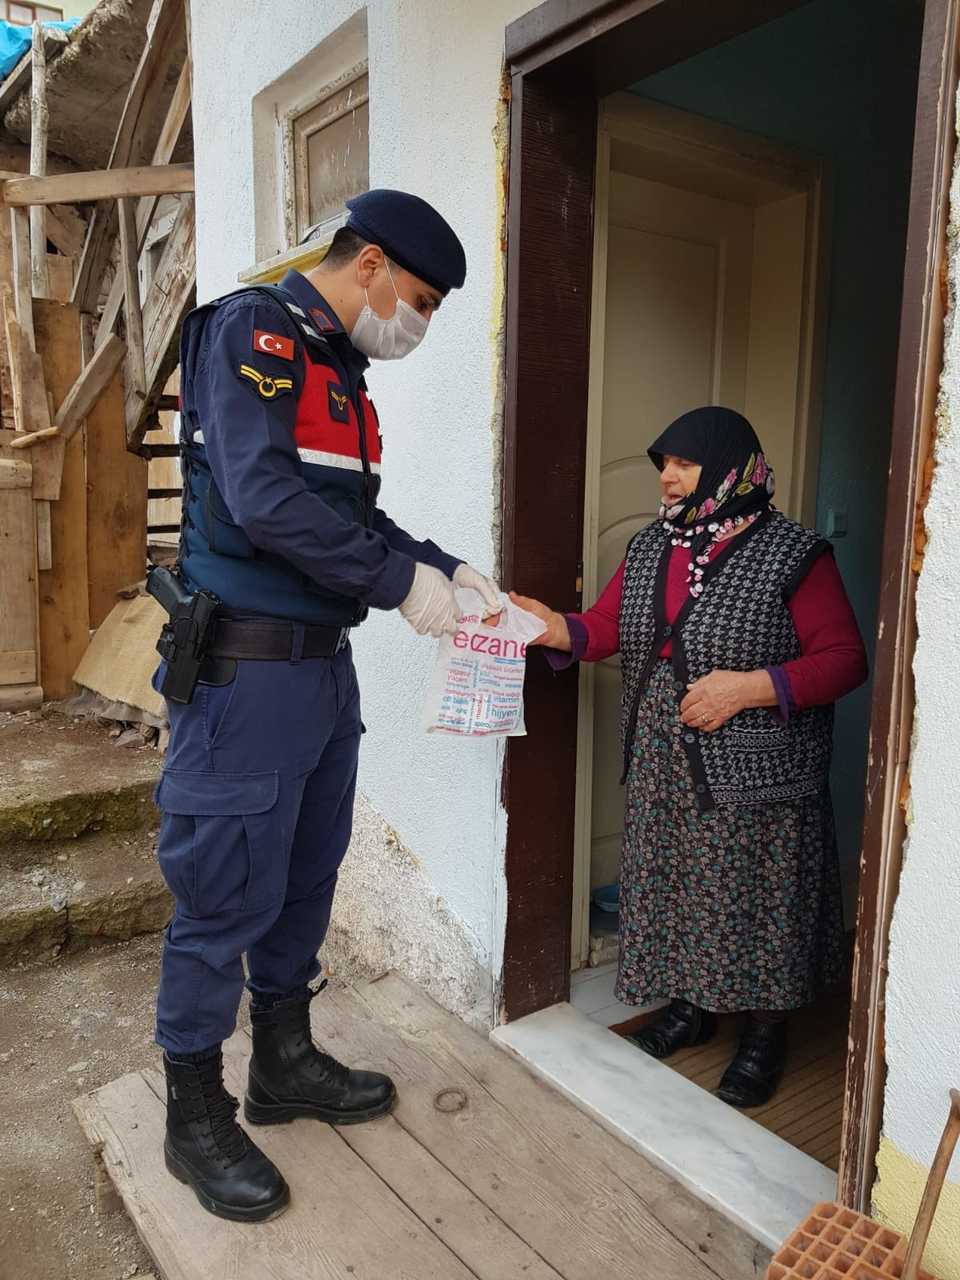 Turkish gendarmerie brings medicine to elderly women. The paramilitary force has a helpline number on which anyone above 65 can call for any assistance.